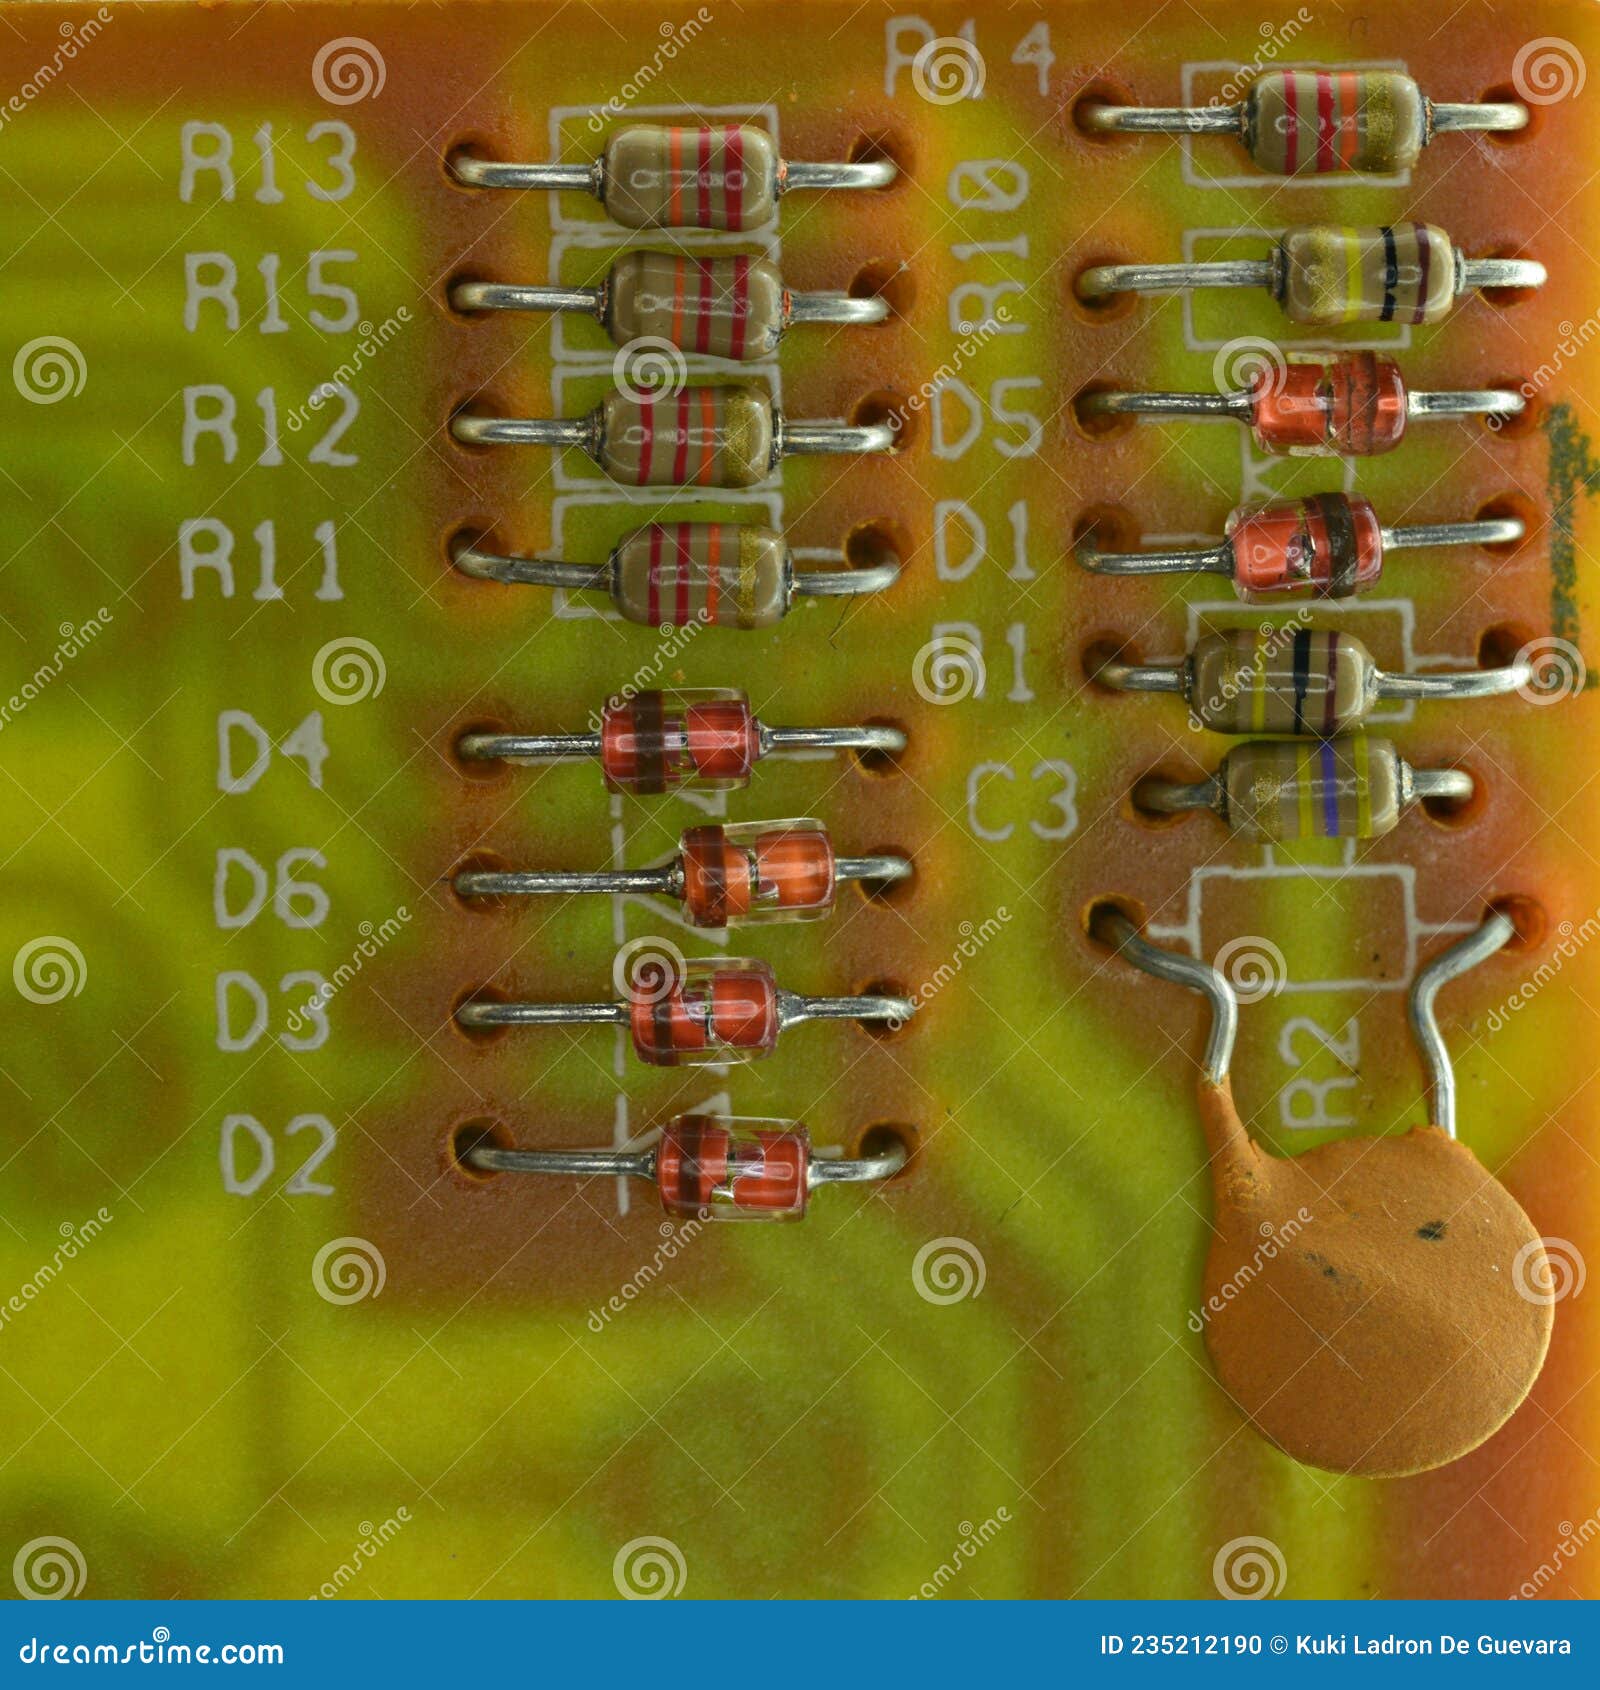 detail of an electronic board